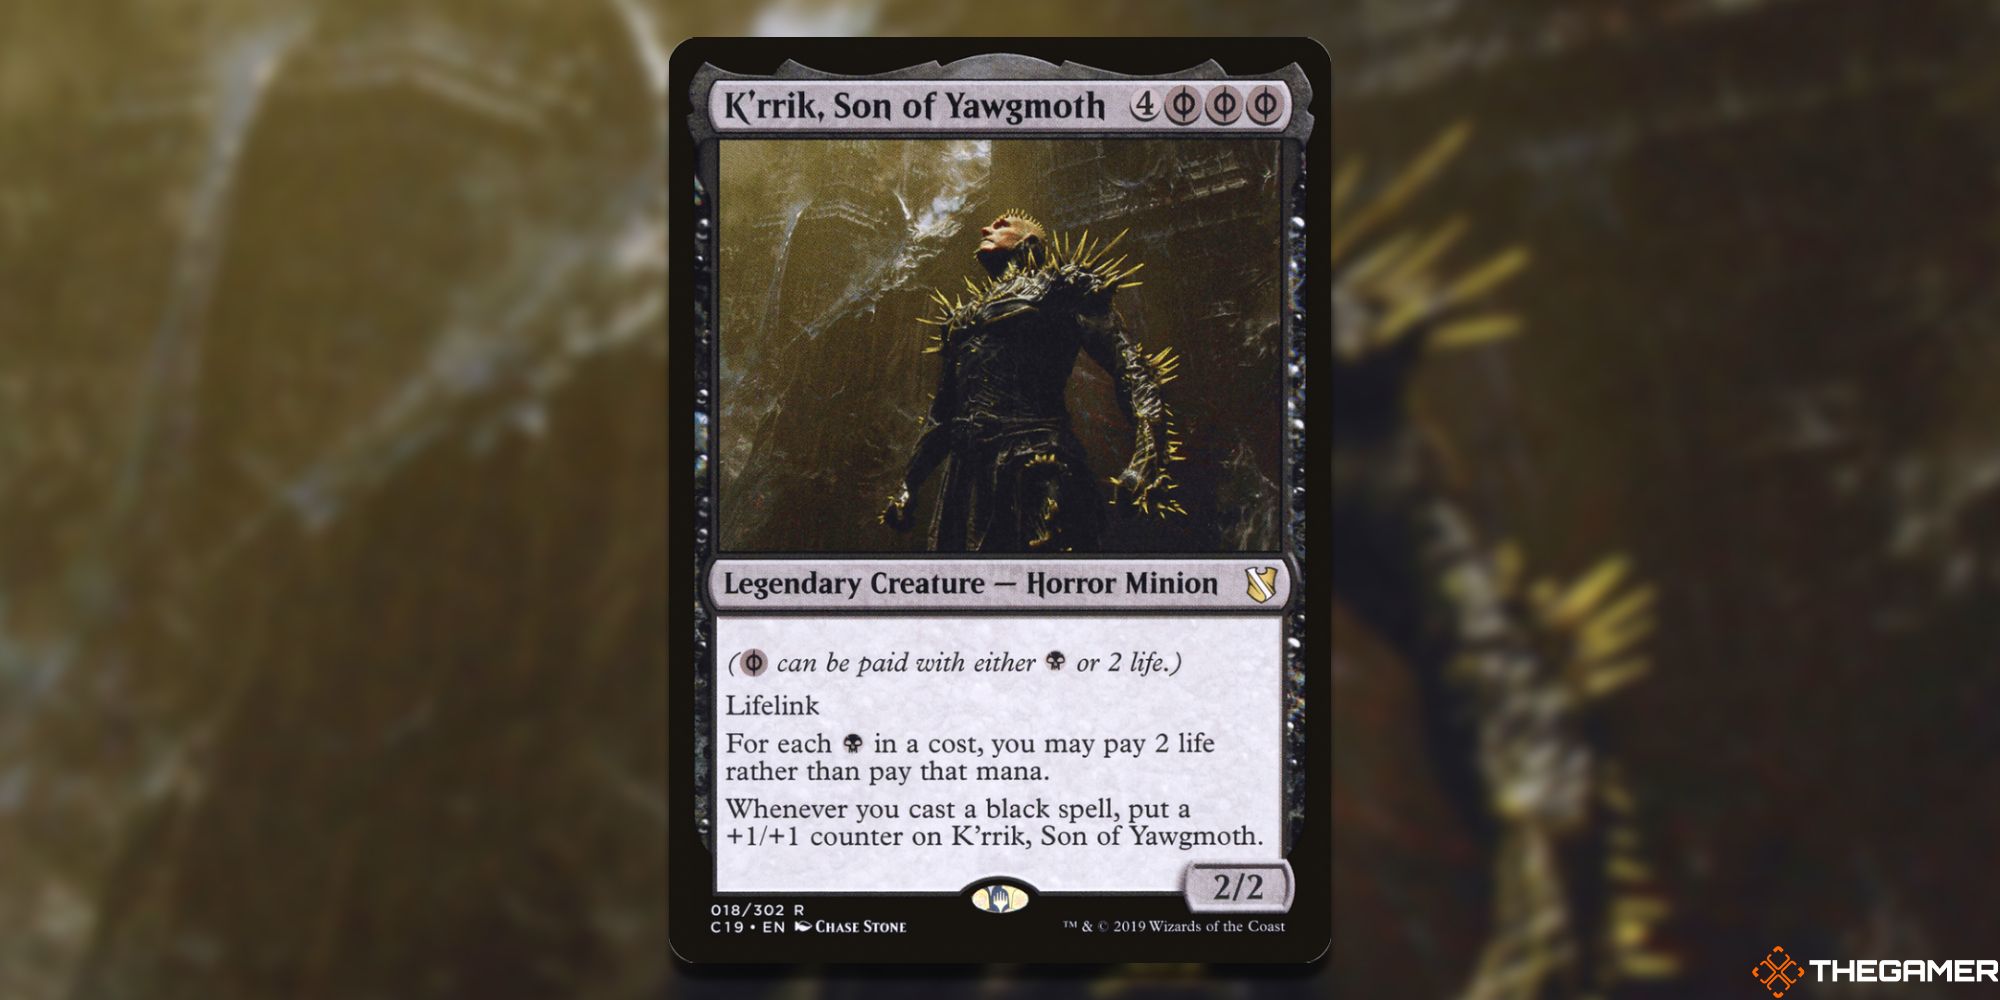 Image of the K'rrik, Son of Yawgmoth card in Magic: The Gathering, with art by Chase Stone